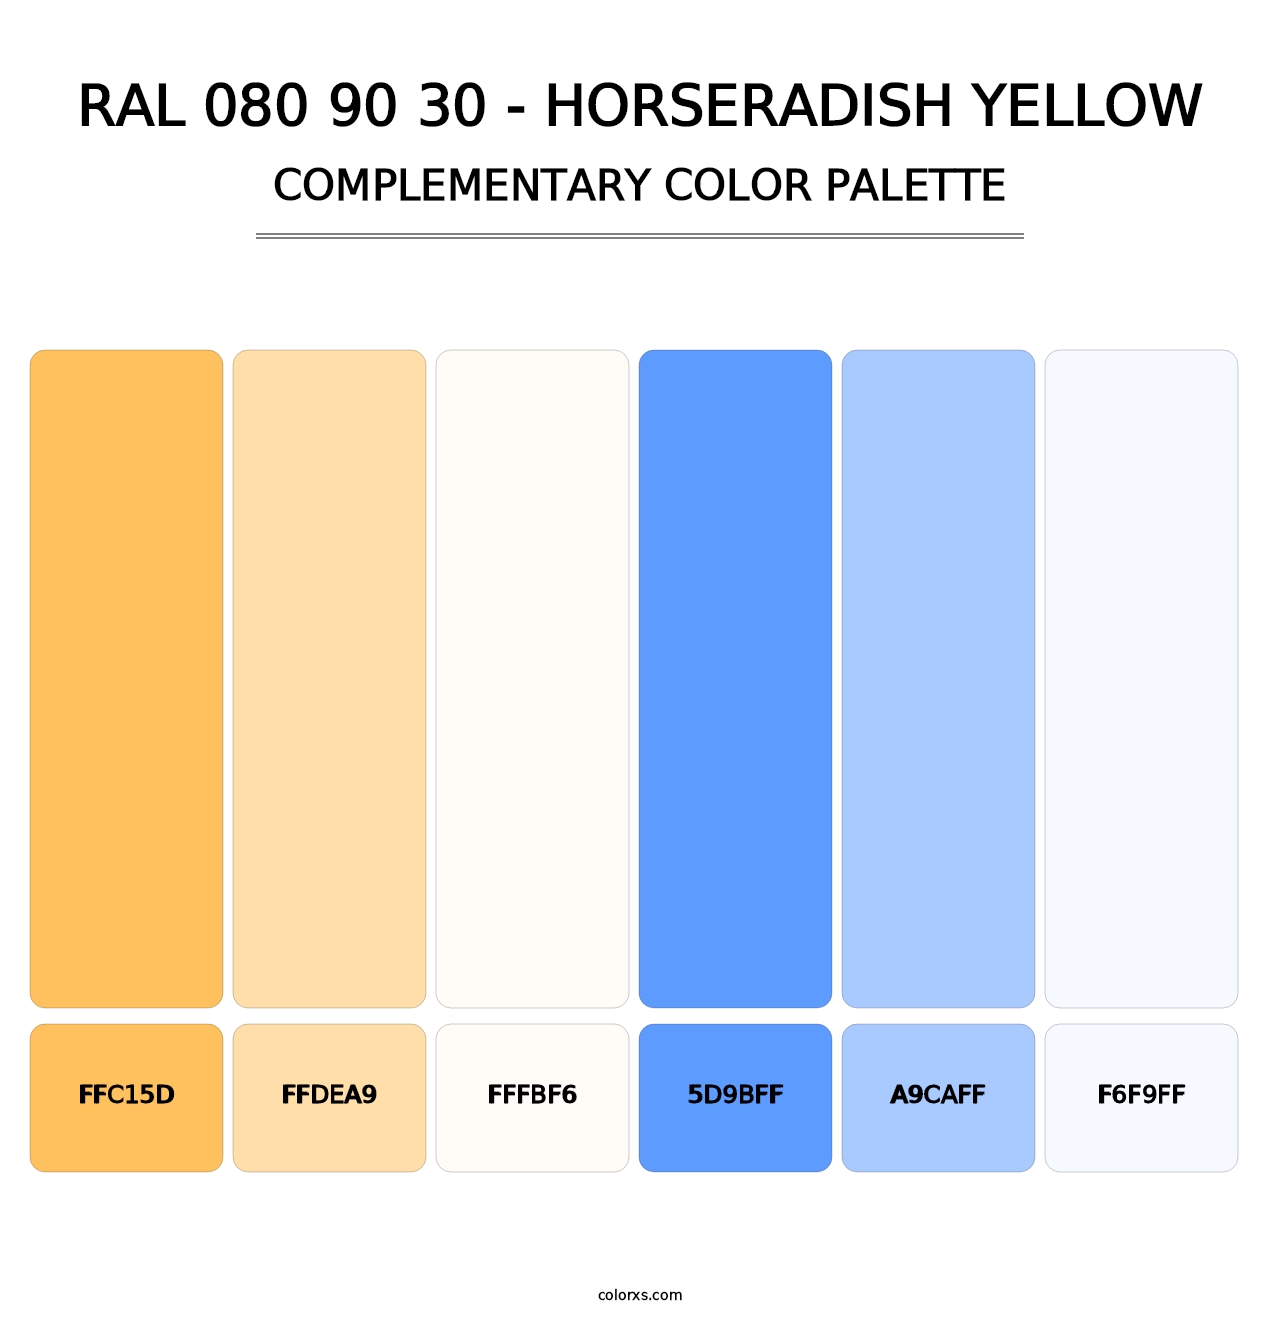 RAL 080 90 30 - Horseradish Yellow - Complementary Color Palette